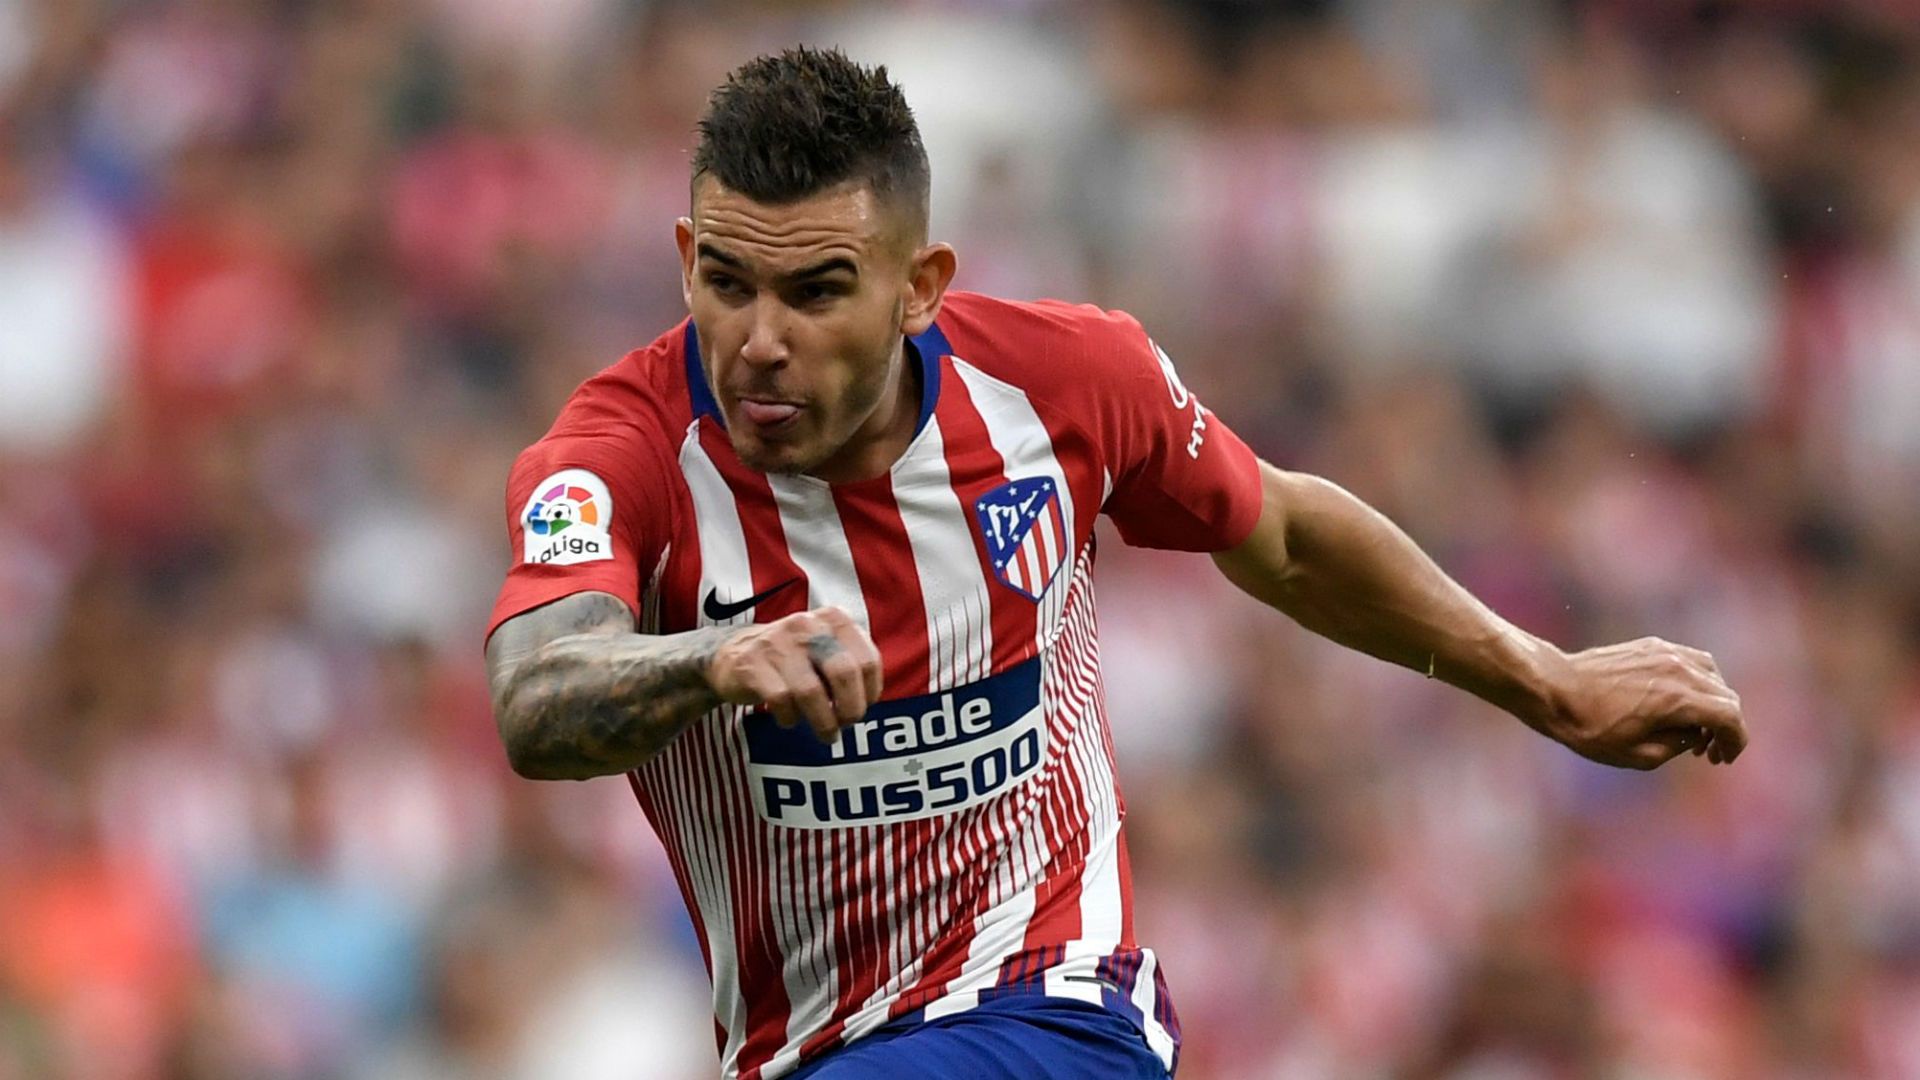 Lucas Hernandez to Bayern Munich, 'I told the club and him what I